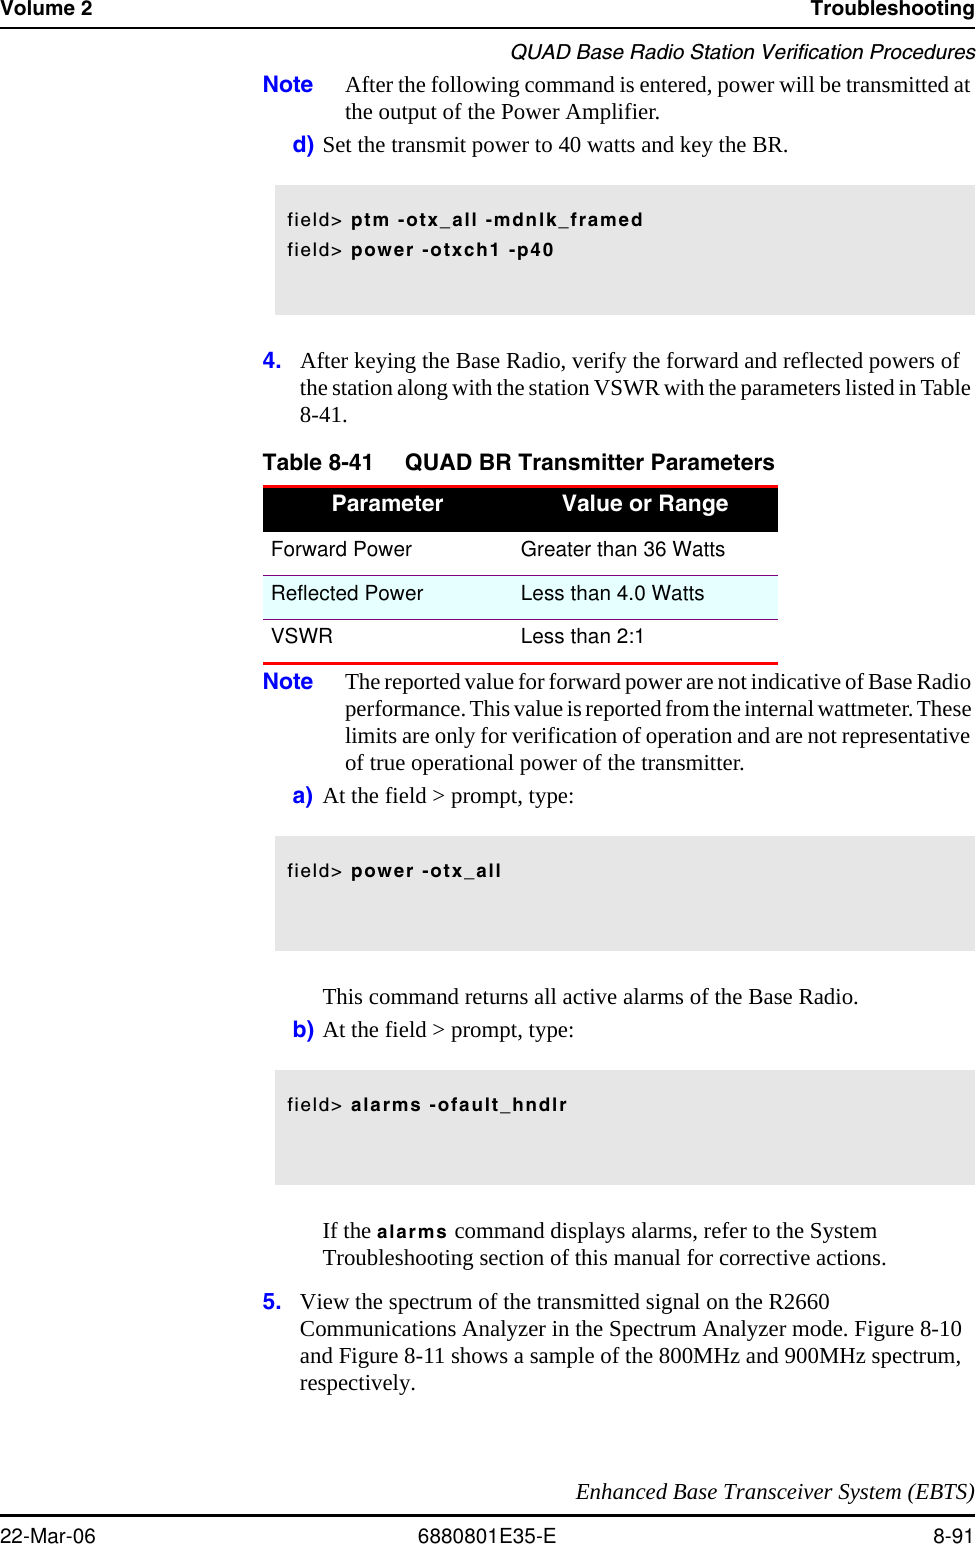 Volume 2 TroubleshootingQUAD Base Radio Station Verification ProceduresEnhanced Base Transceiver System (EBTS)22-Mar-06 6880801E35-E 8-91Note After the following command is entered, power will be transmitted at the output of the Power Amplifier.d) Set the transmit power to 40 watts and key the BR.4. After keying the Base Radio, verify the forward and reflected powers of the station along with the station VSWR with the parameters listed in Table 8-41. Note The reported value for forward power are not indicative of Base Radio performance. This value is reported from the internal wattmeter. These limits are only for verification of operation and are not representative of true operational power of the transmitter. a) At the field &gt; prompt, type:This command returns all active alarms of the Base Radio.b) At the field &gt; prompt, type: If the alarms command displays alarms, refer to the System Troubleshooting section of this manual for corrective actions.5. View the spectrum of the transmitted signal on the R2660 Communications Analyzer in the Spectrum Analyzer mode. Figure 8-10 and Figure 8-11 shows a sample of the 800MHz and 900MHz spectrum, respectively. Table 8-41 QUAD BR Transmitter ParametersParameter Value or RangeForward Power Greater than 36 WattsReflected Power Less than 4.0 WattsVSWR Less than 2:1field&gt; ptm -otx_all -mdnlk_framedfield&gt; power -otxch1 -p40field&gt; power -otx_allfield&gt; alarms -ofault_hndlr